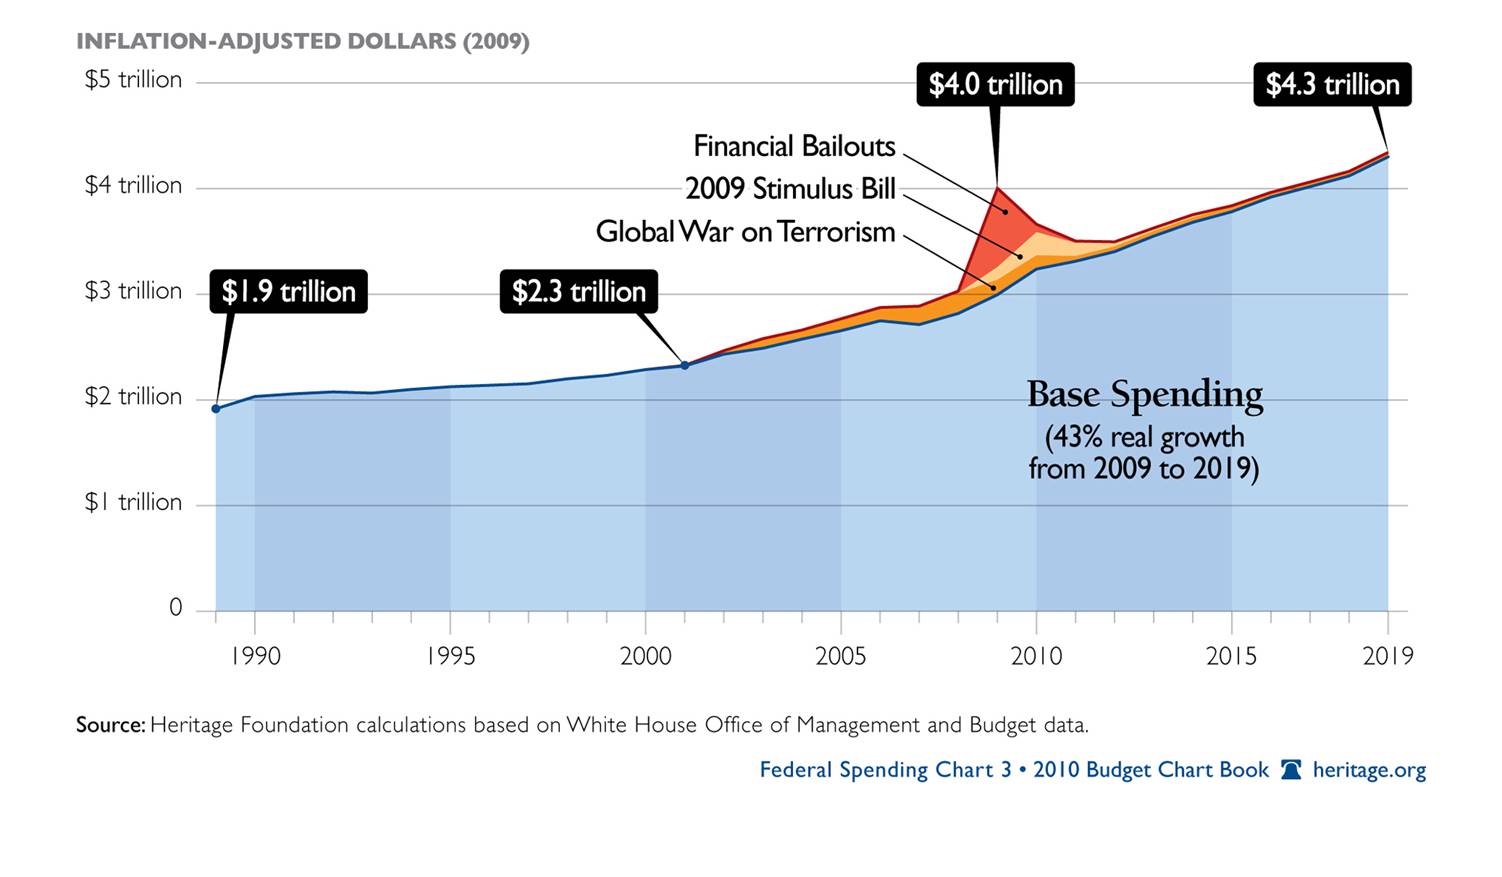 Recent Spending Hikes Are Not Limited to Temporary Emergencies